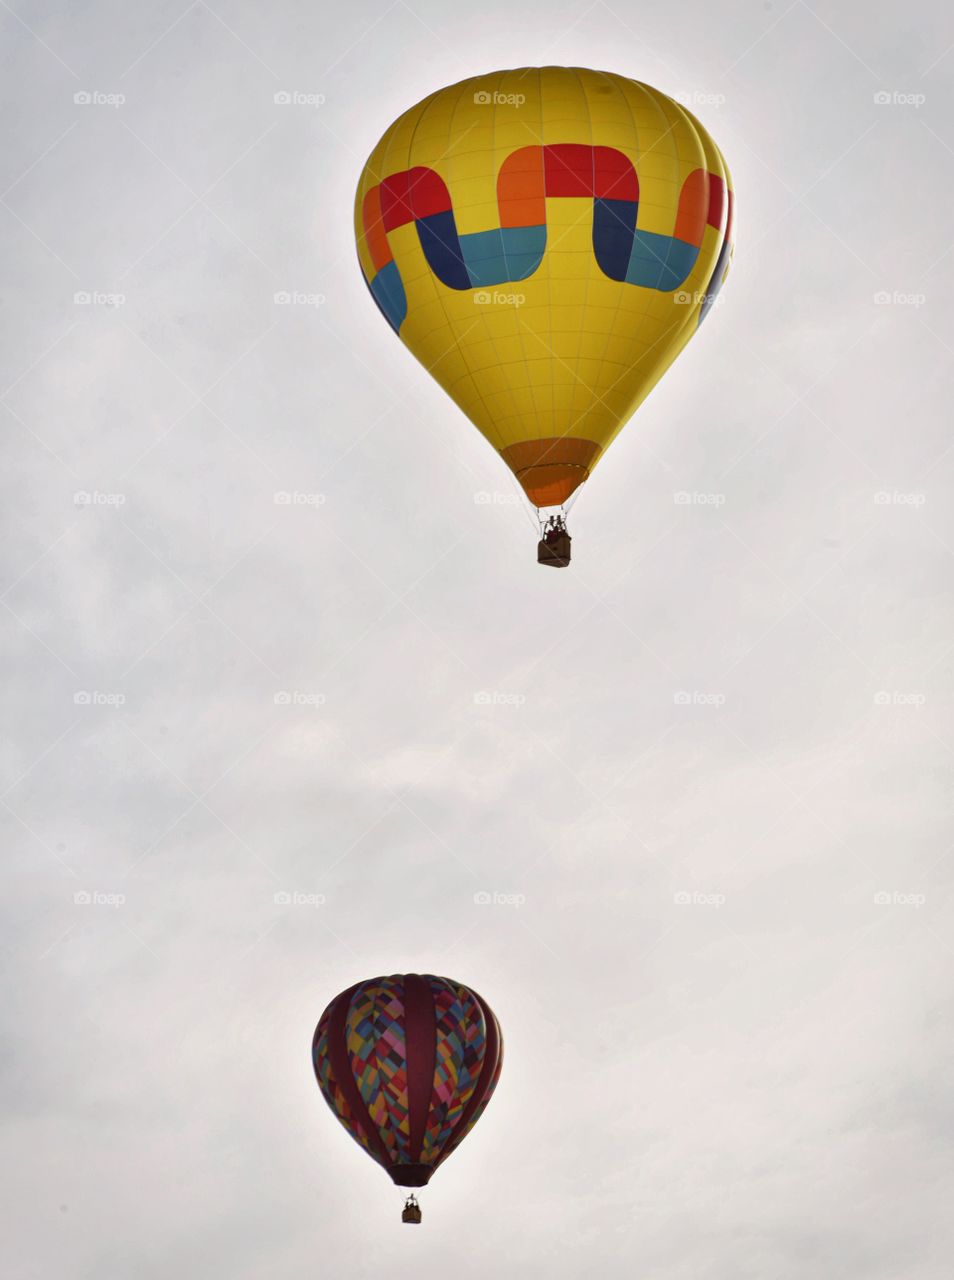 A hot air balloon festival in the winter creates a colorful scene. Clouds and sun create an atmospheric shot.